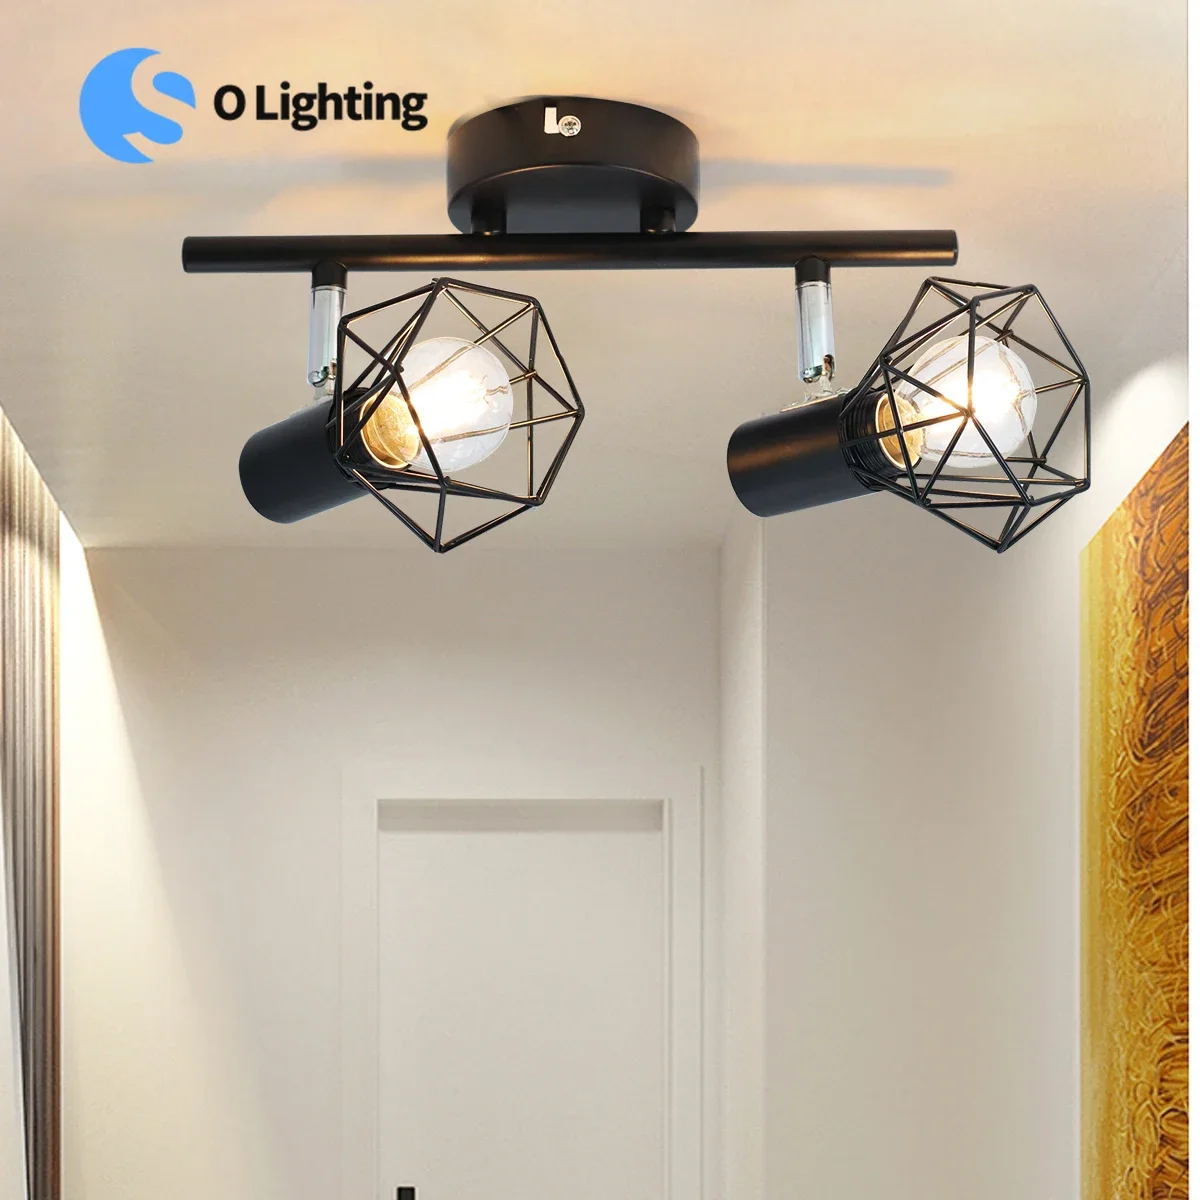 

AC90-260v Led Track Light，Simple Style E14 Ceiling 2 Head Fixture, for Living Room, Kitchen, Utility Room Bedroom, Kitchen